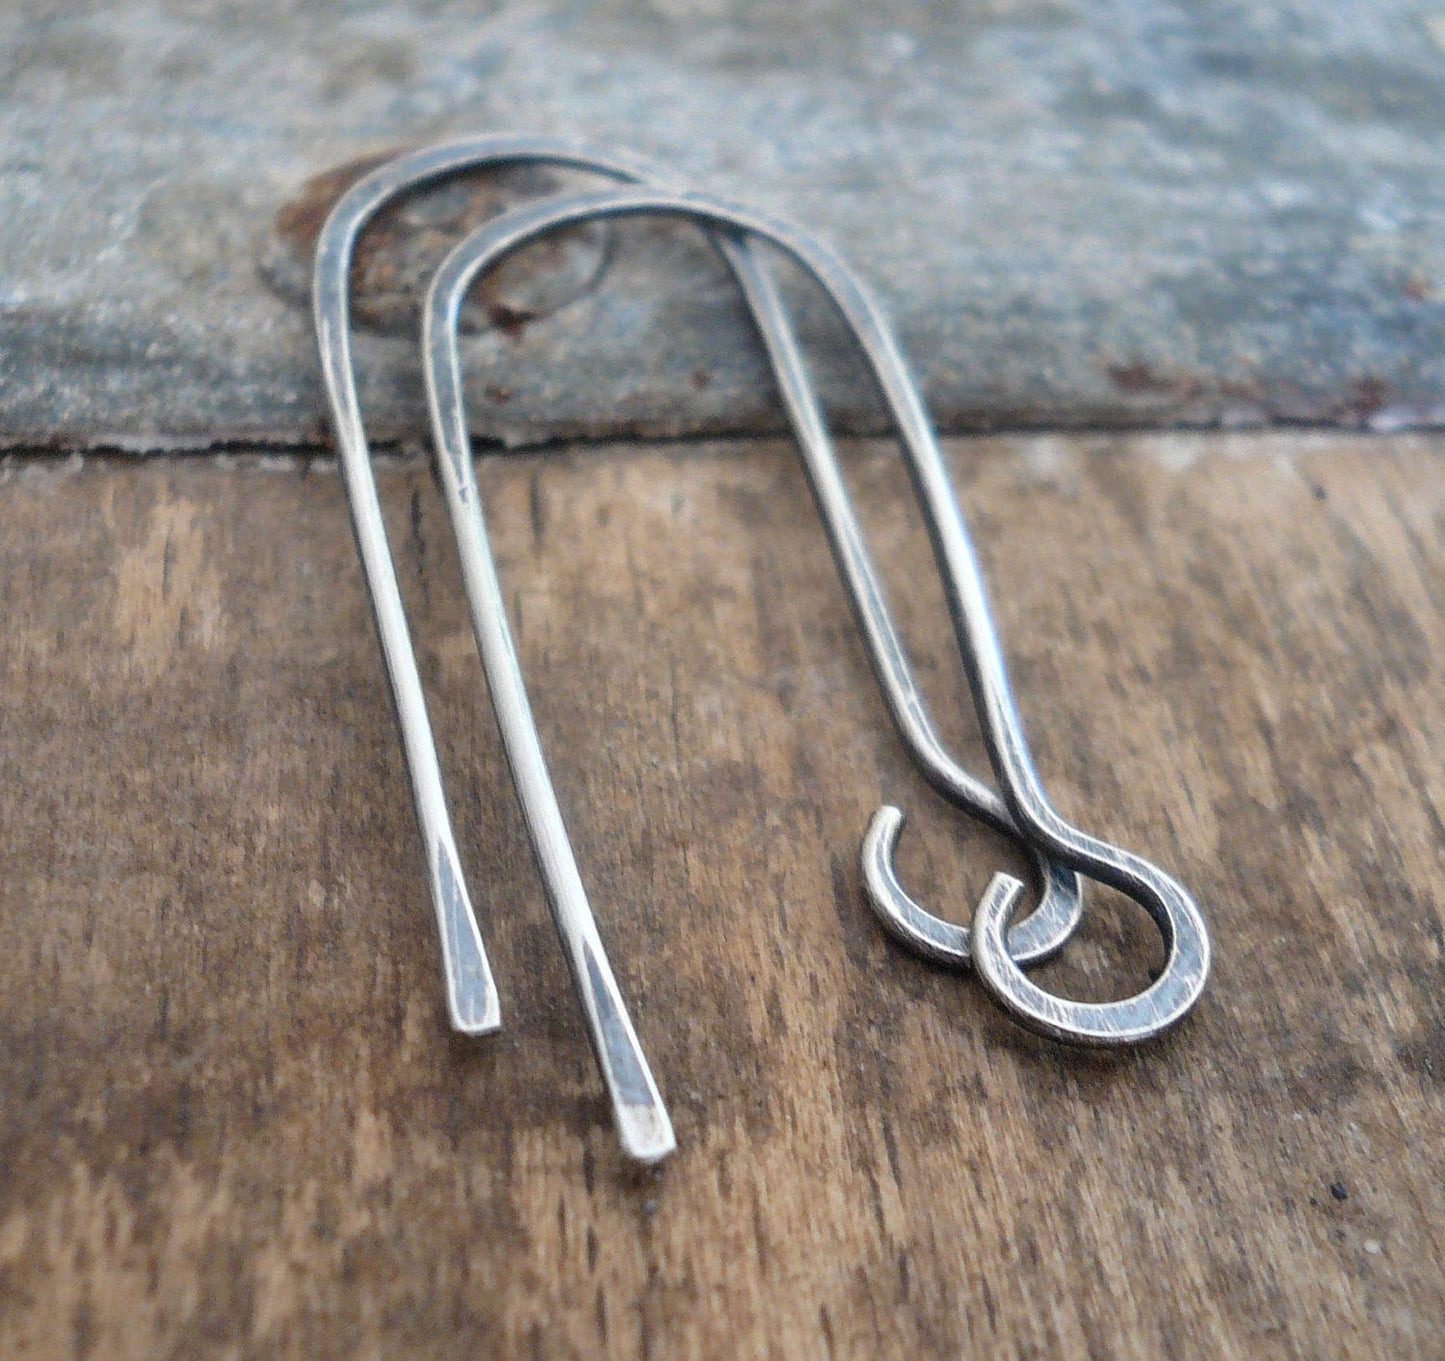 Minimalist Sterling Silver Earwires - Handmade. Handforged. Oxidized and Polished